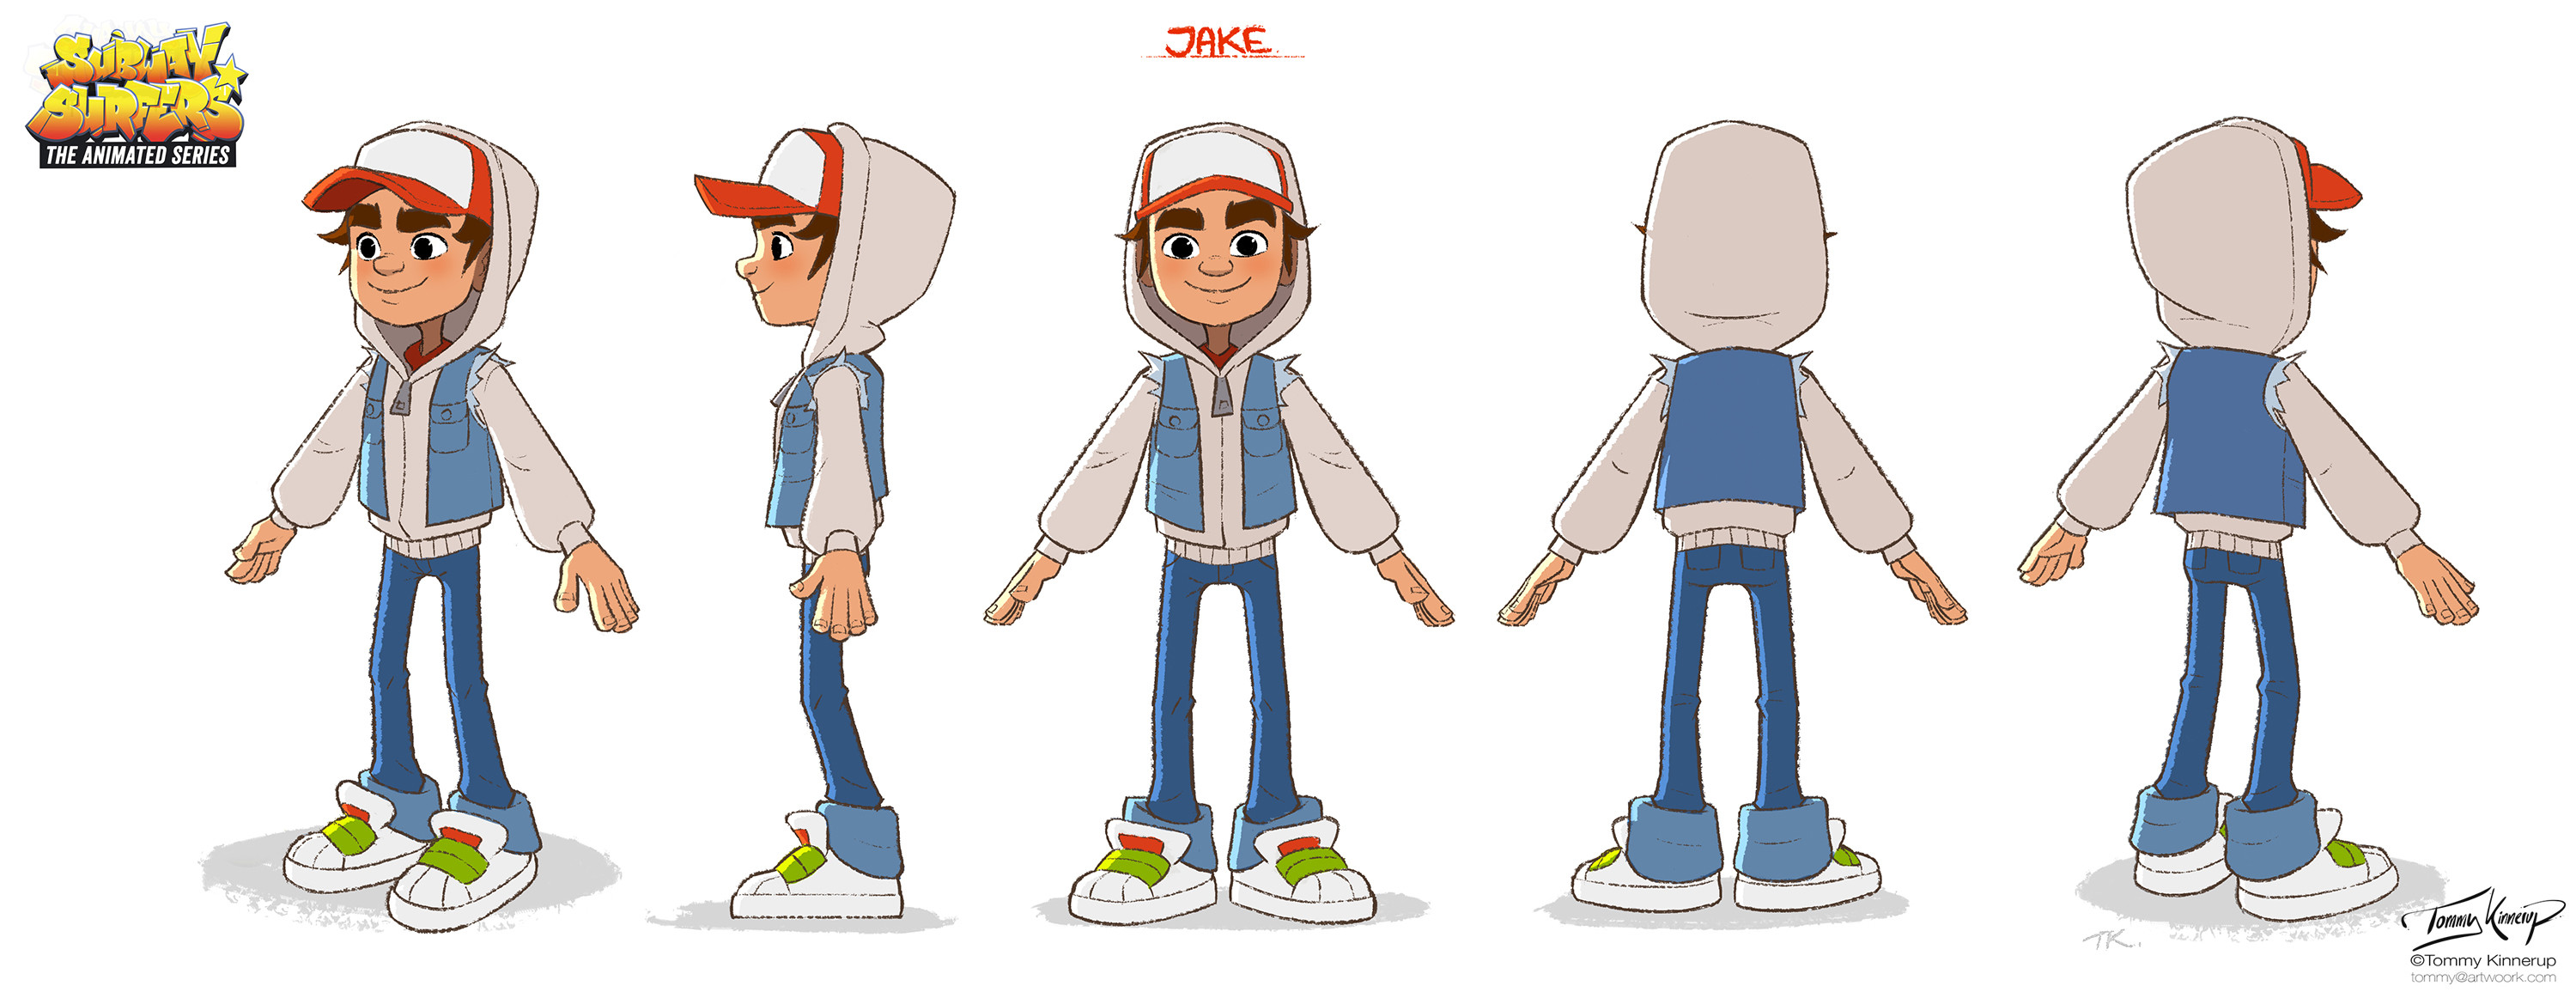 ArtStation - Character Designs for Subway Surfers The Animated Series